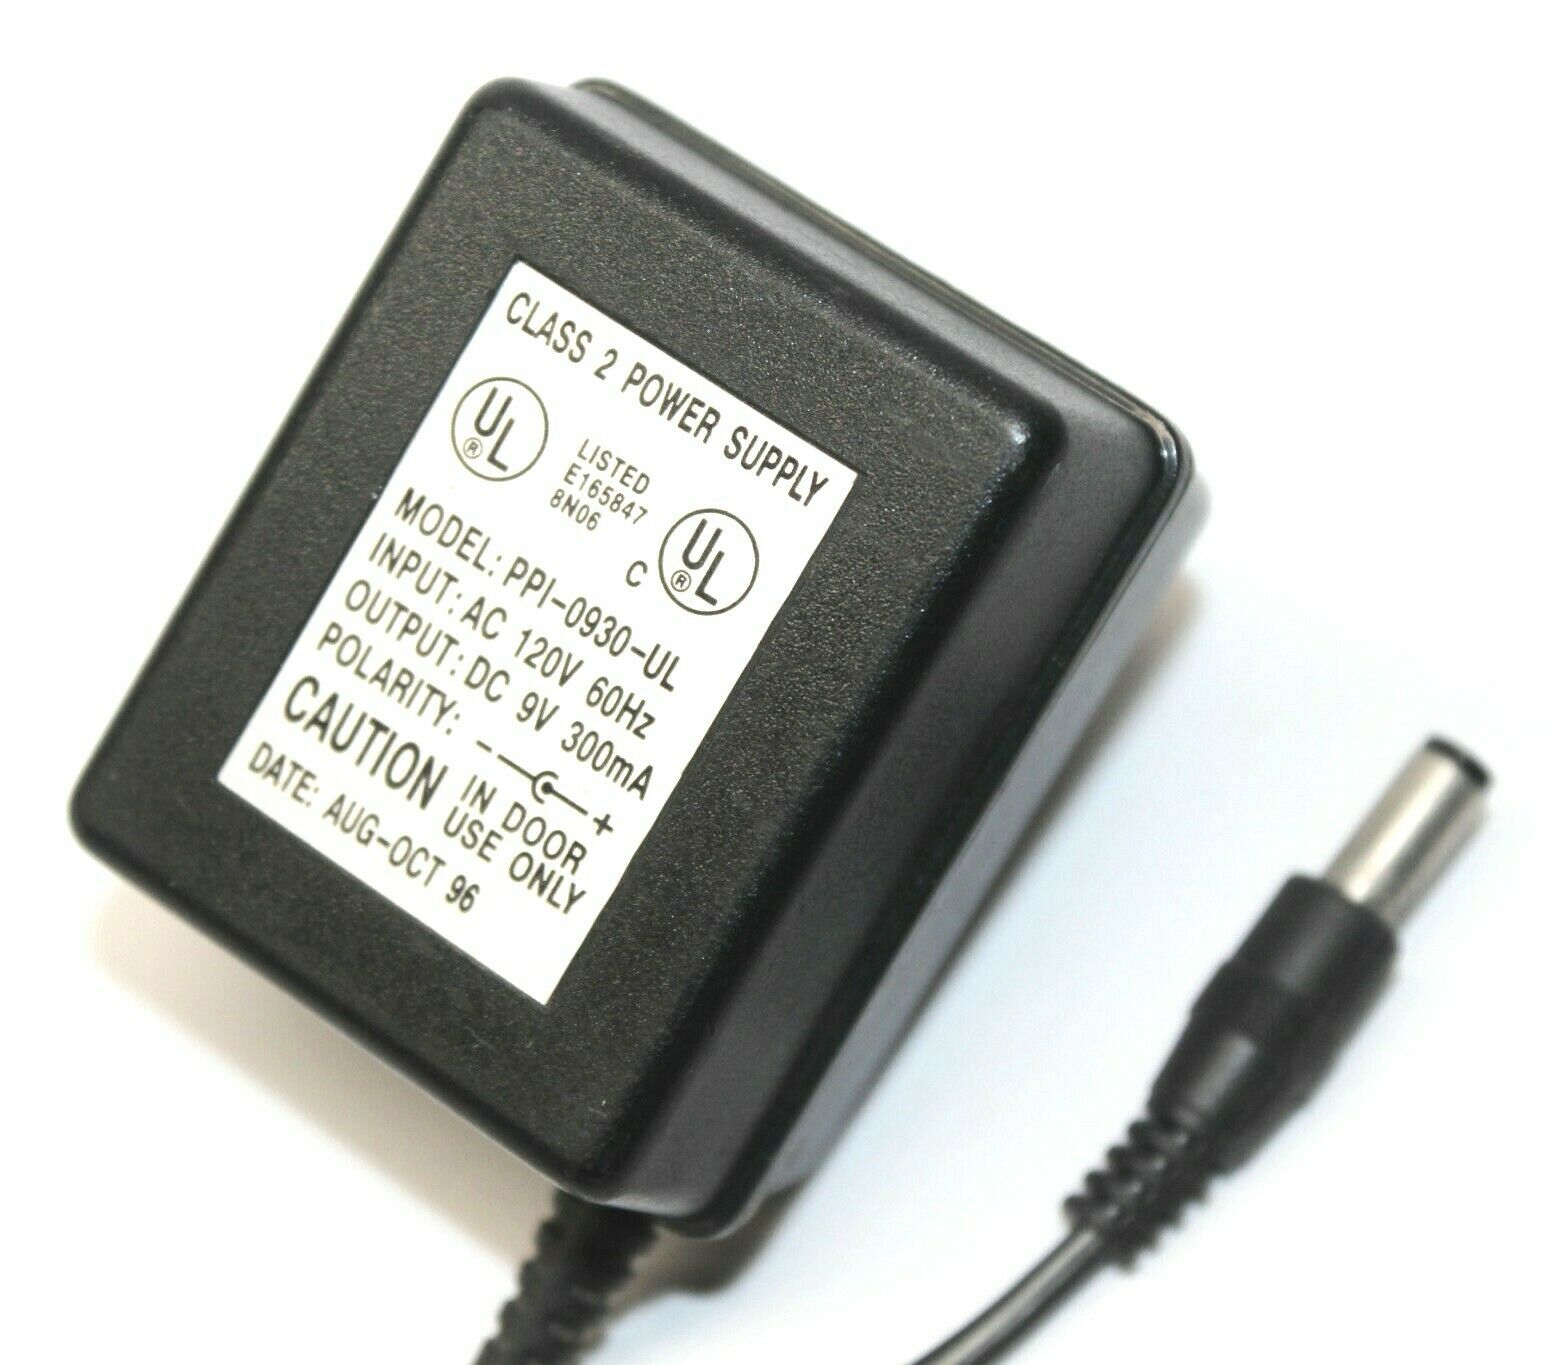 New DC9V 300mA PPI-0930-UL Class 2 Power Supply AC ADAPTER - Click Image to Close